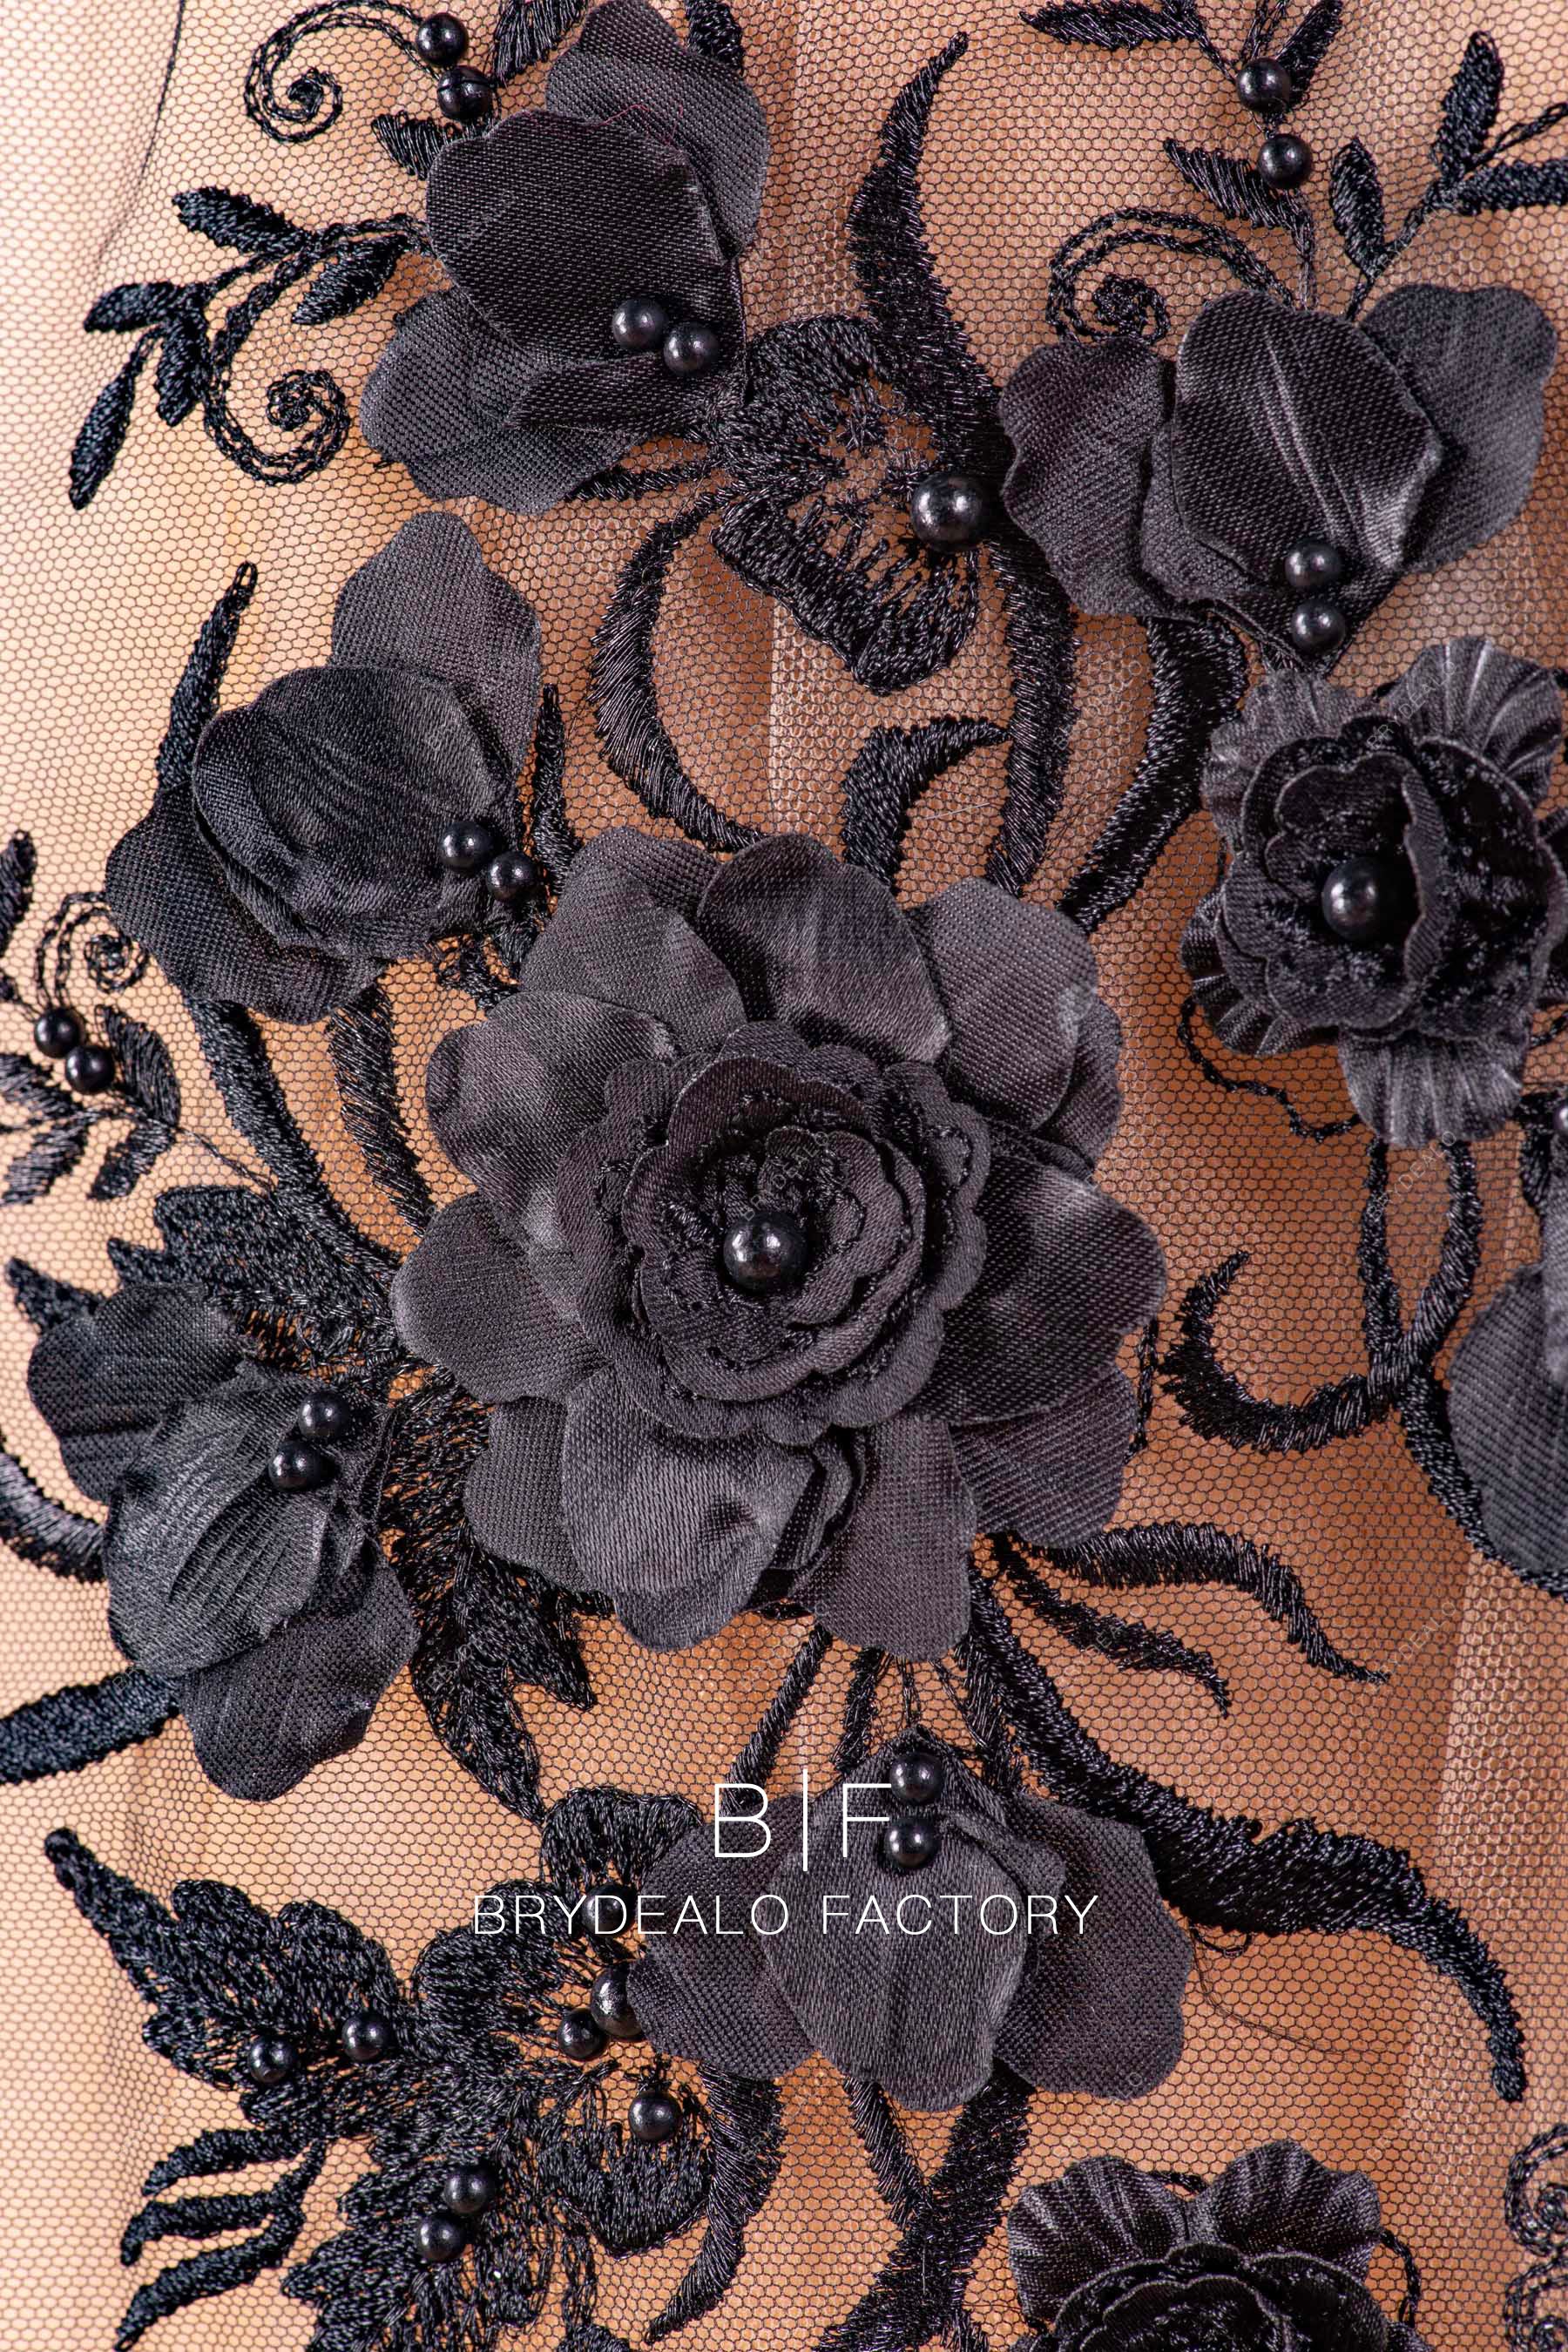 Black 3D Floral Embroidered Lace on a Black Netting, Black Lace